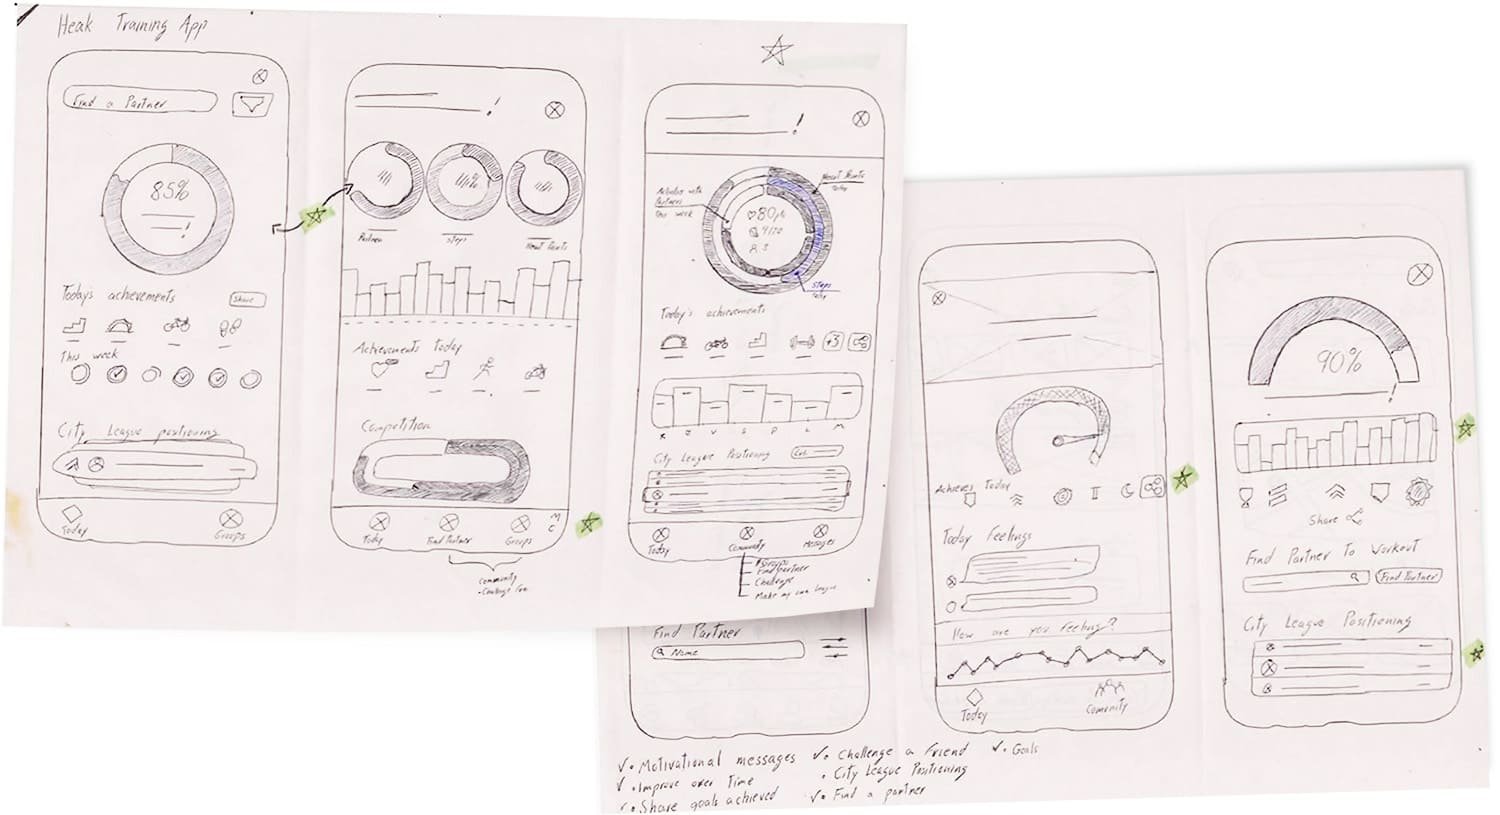 Sketches of variants of the Home screen